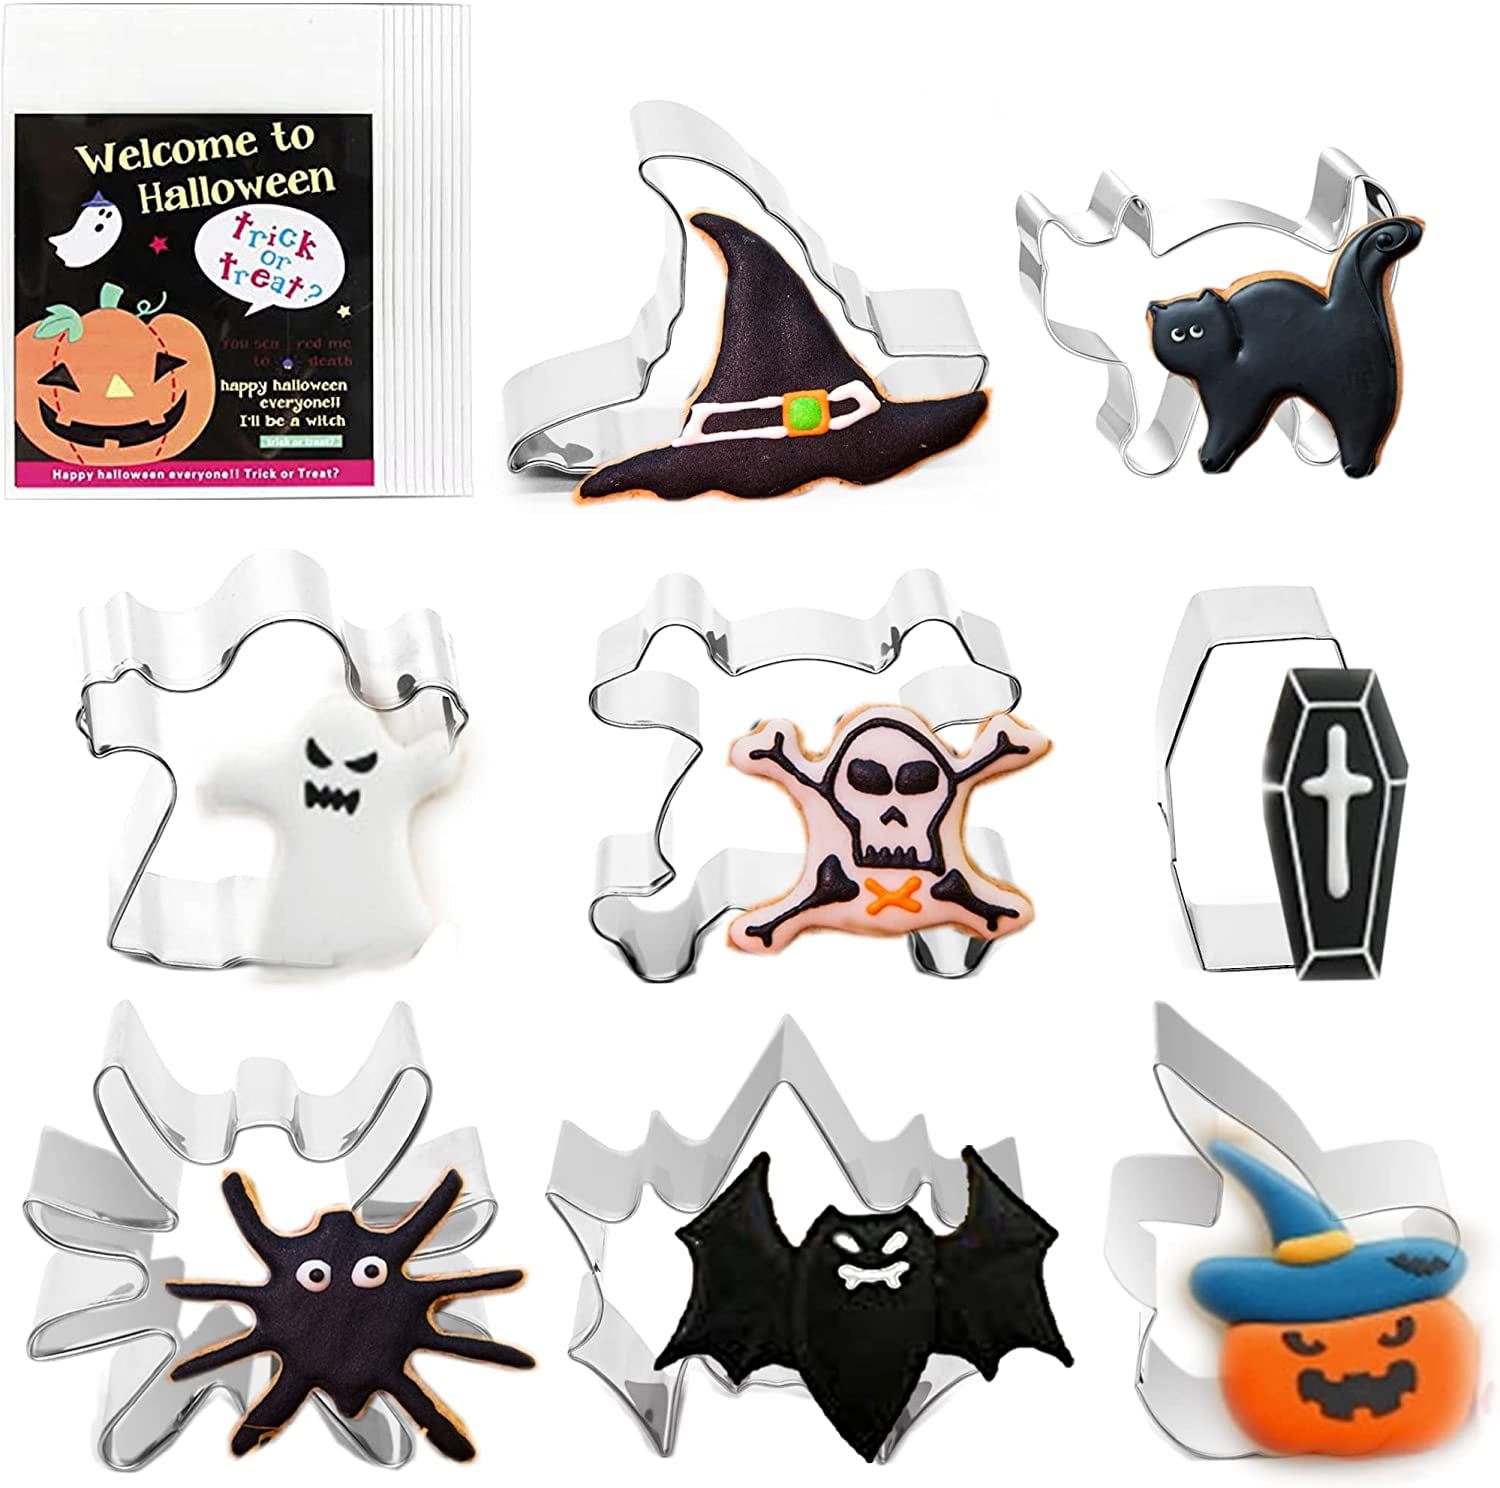 Halloween Theme Cookie Cutter Set Ghost Bat Pumphin Witch Hat Black cat Coffin Fondant Biscuit Pastry Baking Mold